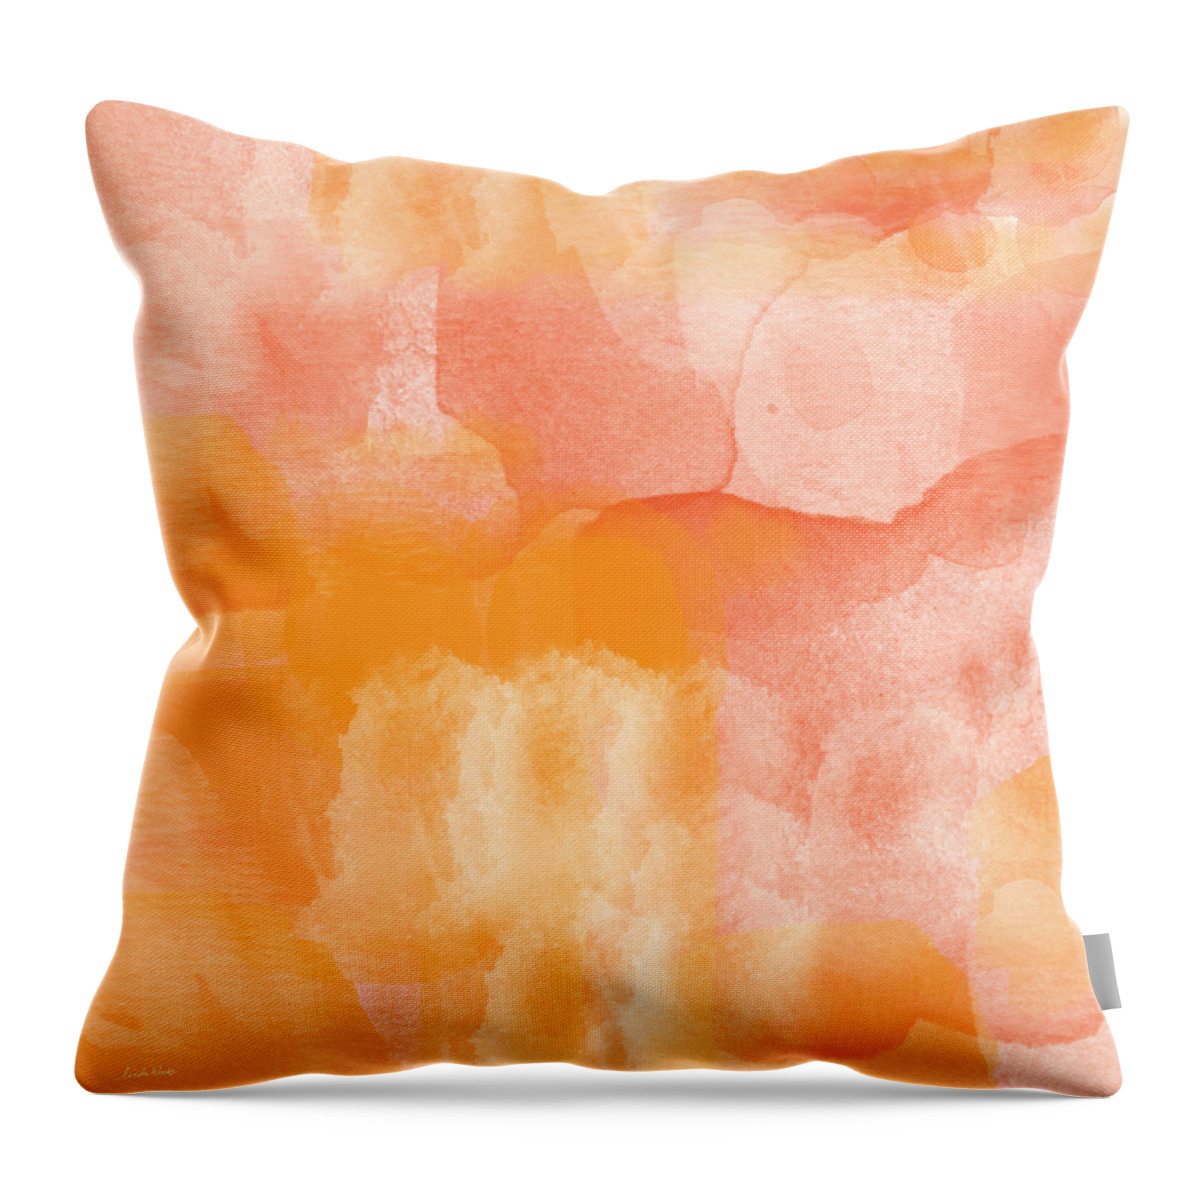 Orange Throw Pillow featuring the painting Tuscan Rose- Abstract Watercolor by Linda Woods